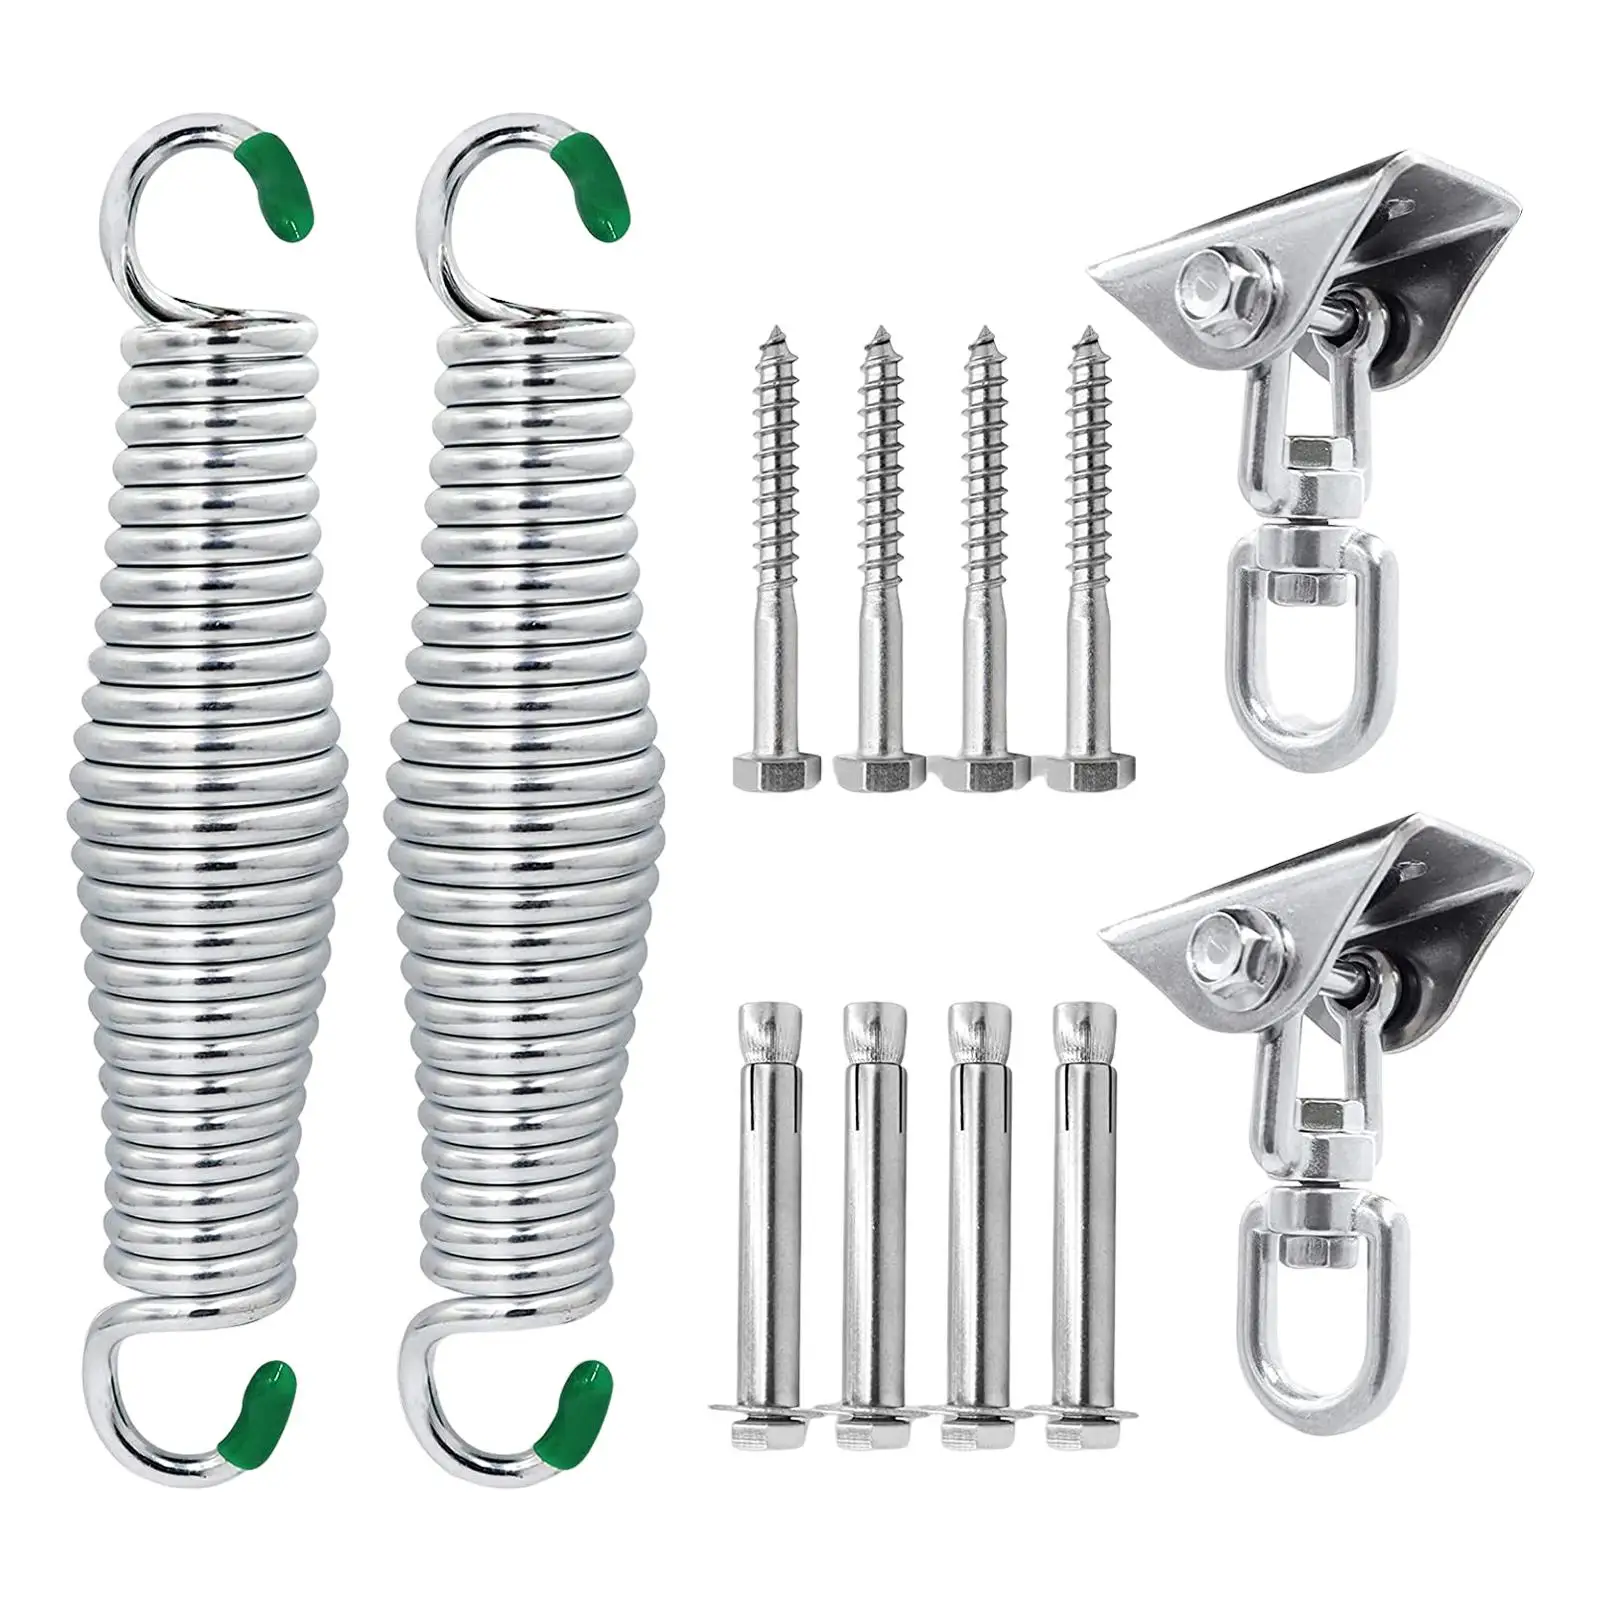 Stainless Steel Swing Hanging Kits Hammock Hooks Ceiling Mount Set Hammock Chair Hardware for Indoor Patio Porch Swings